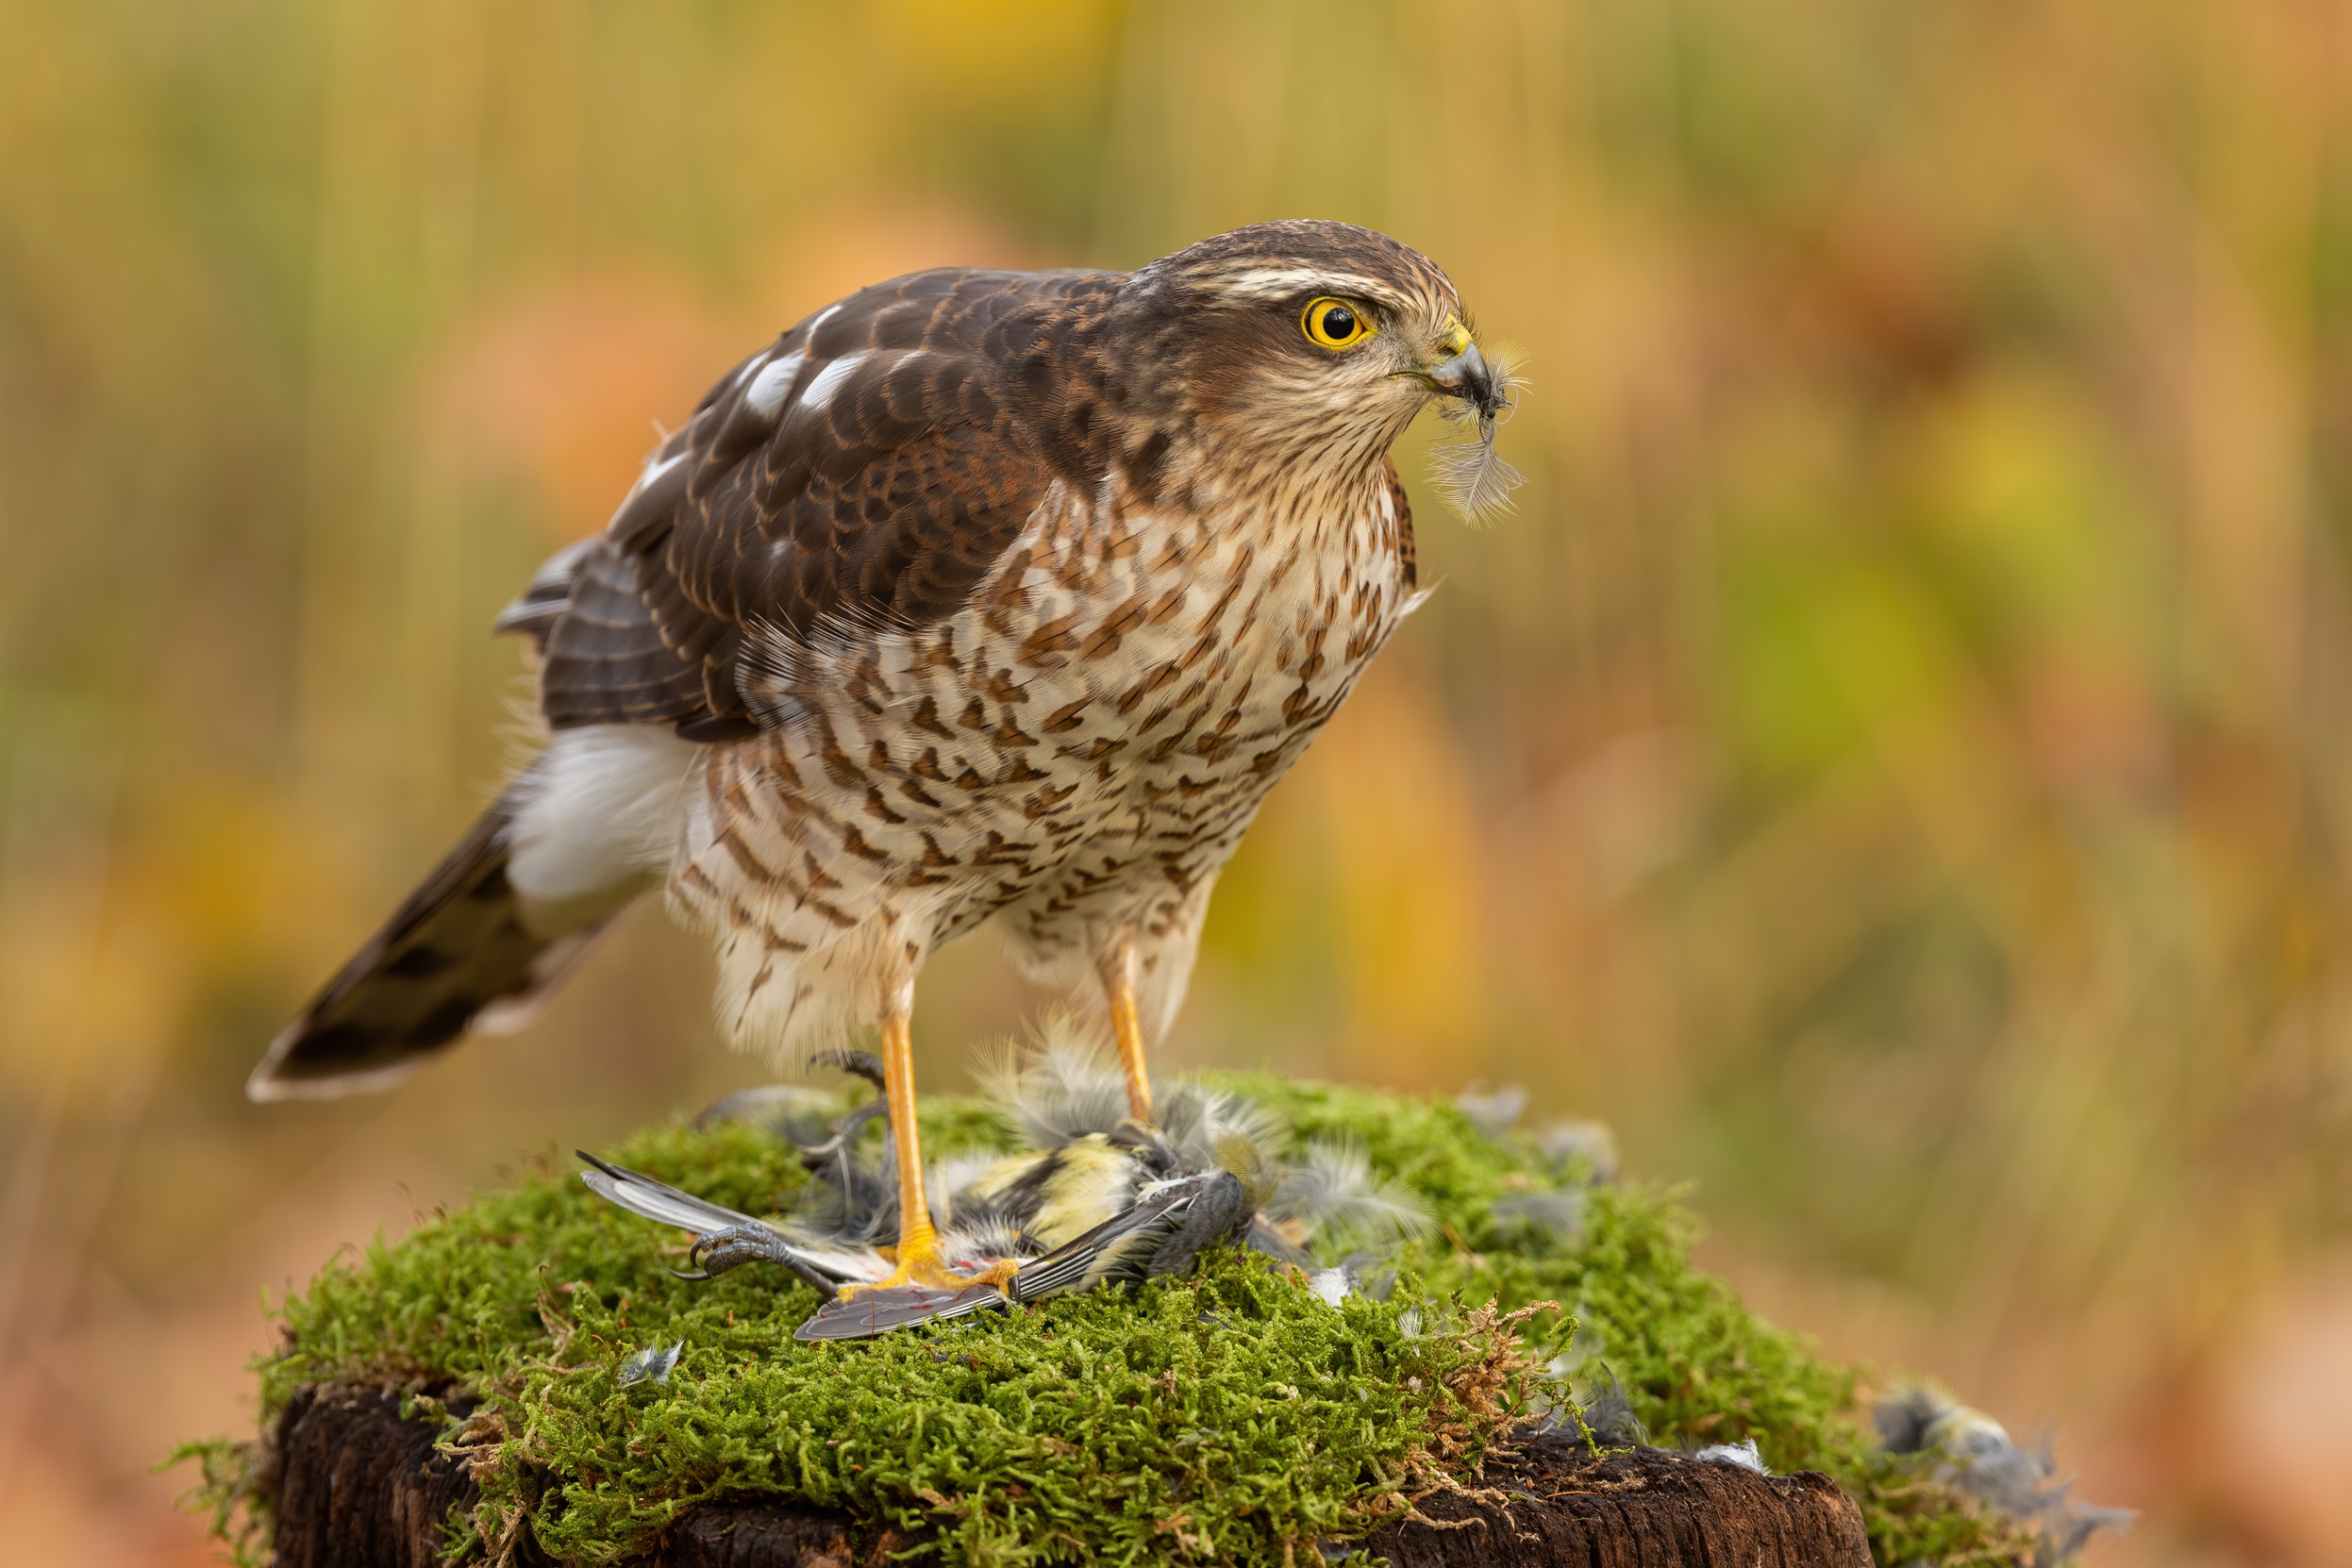 A female Sparrowhawk perched on a moss covered rock with her kill under her talon after a successful hunt.